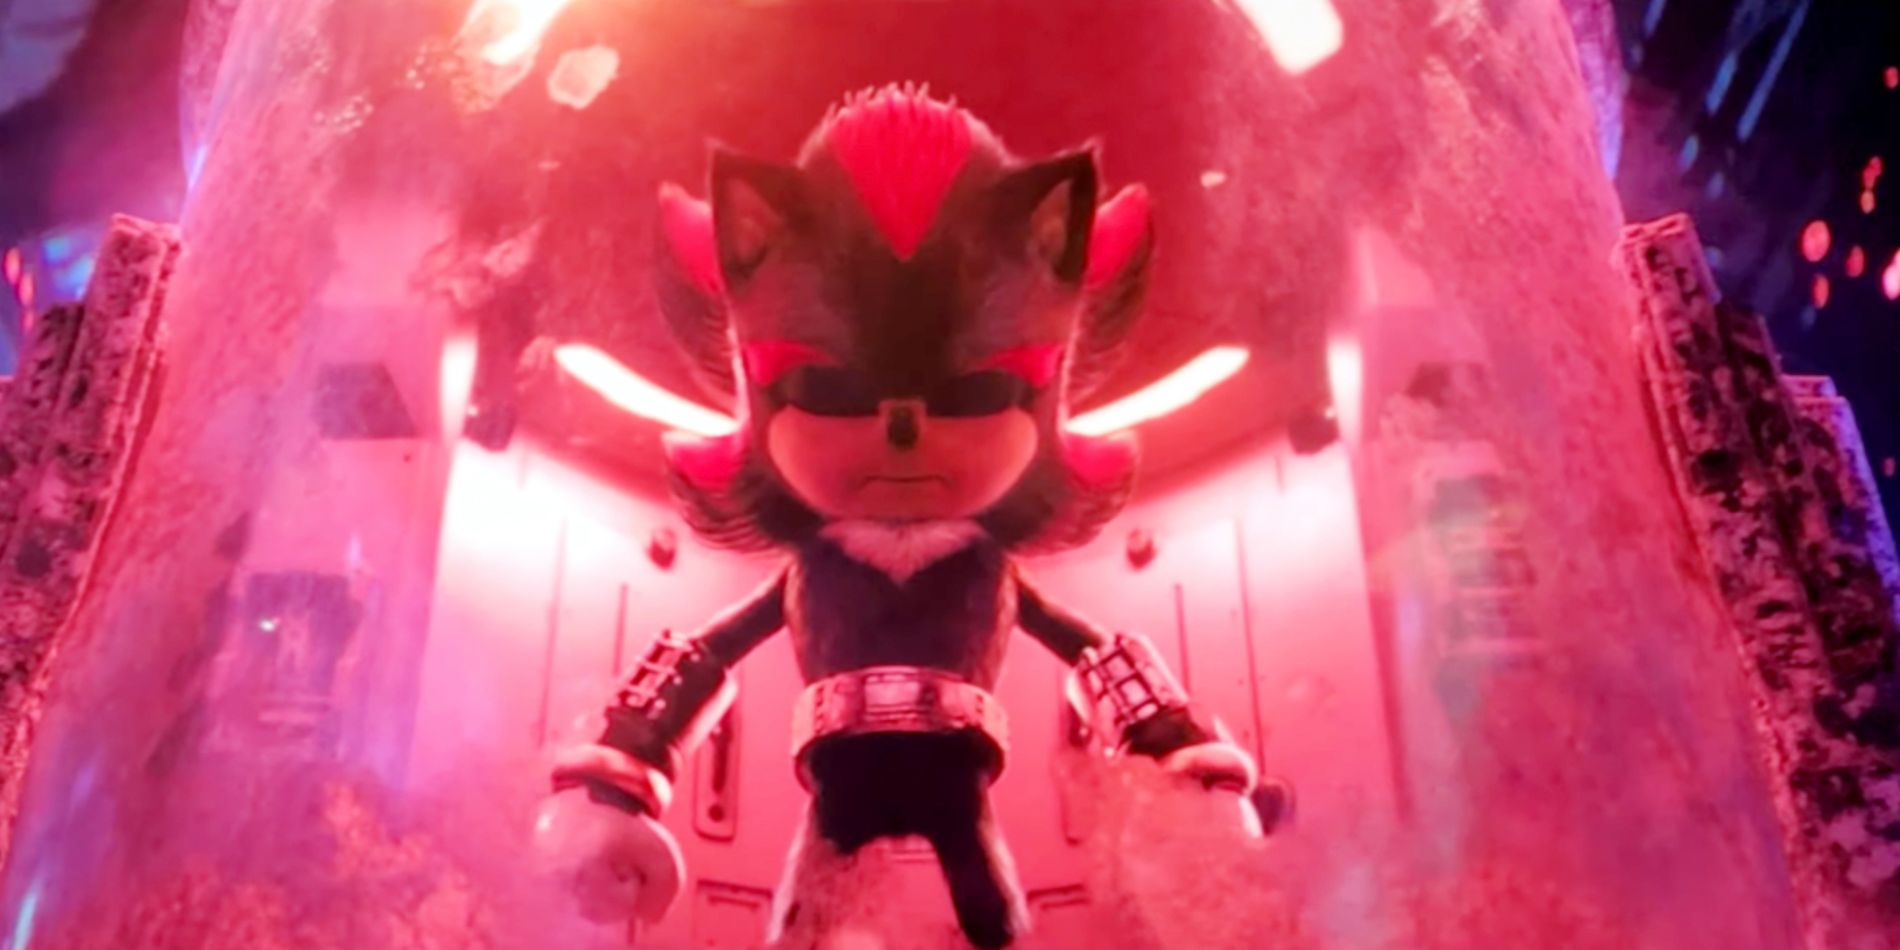 Shadow the Hedgehog awakens in a post-credit scene from Sonic the Hedgehog 2